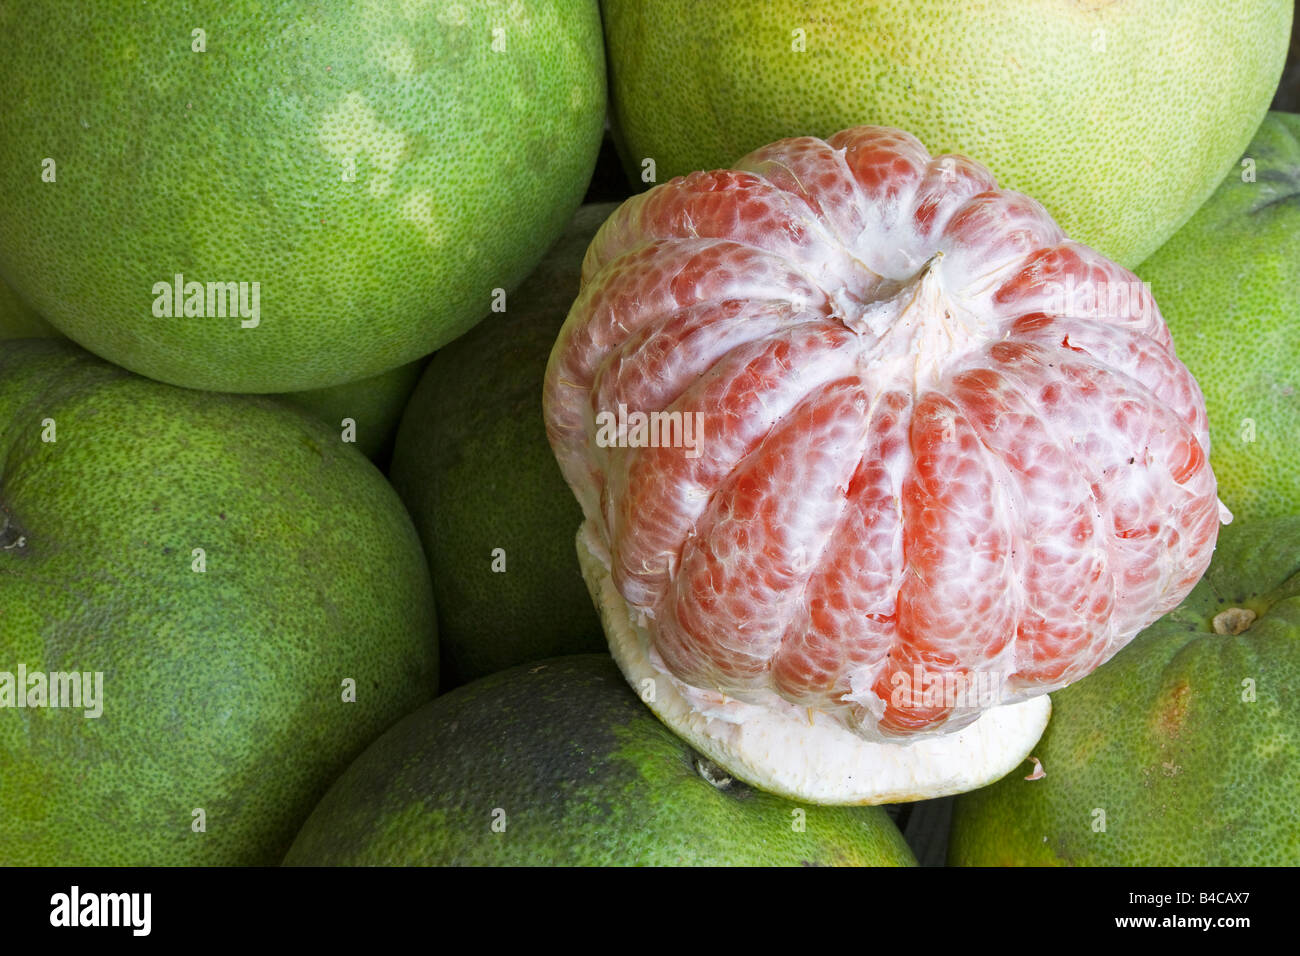 Asia, Malaysia, local fruits in a market stall Stock Photo - Alamy